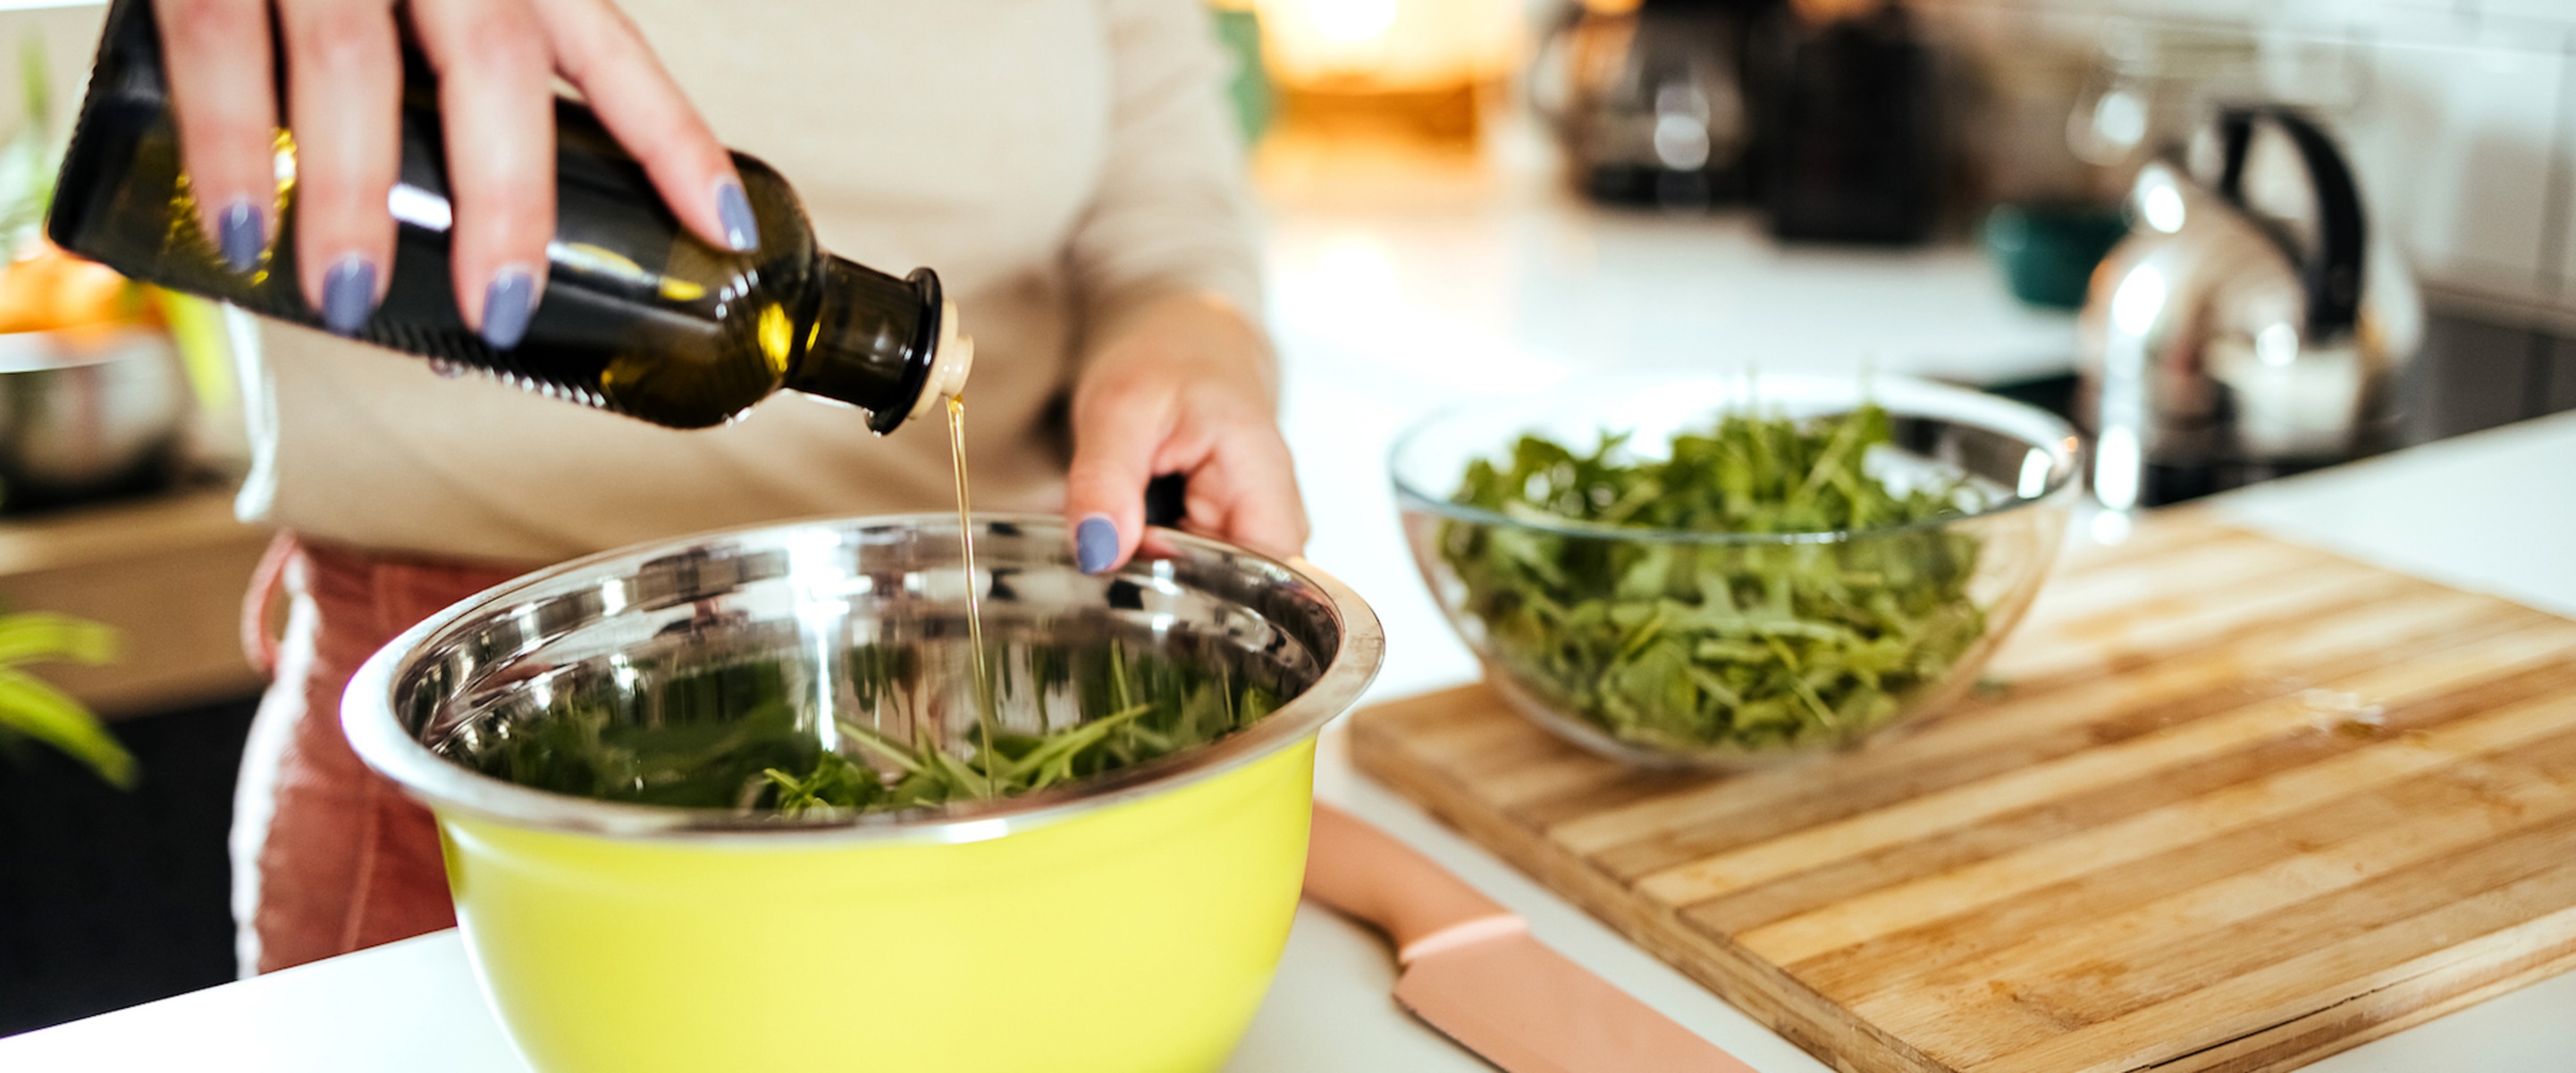 From Olive to Avocado, These Are the 5 Healthiest Cooking Oils You Need In Your Kitchen